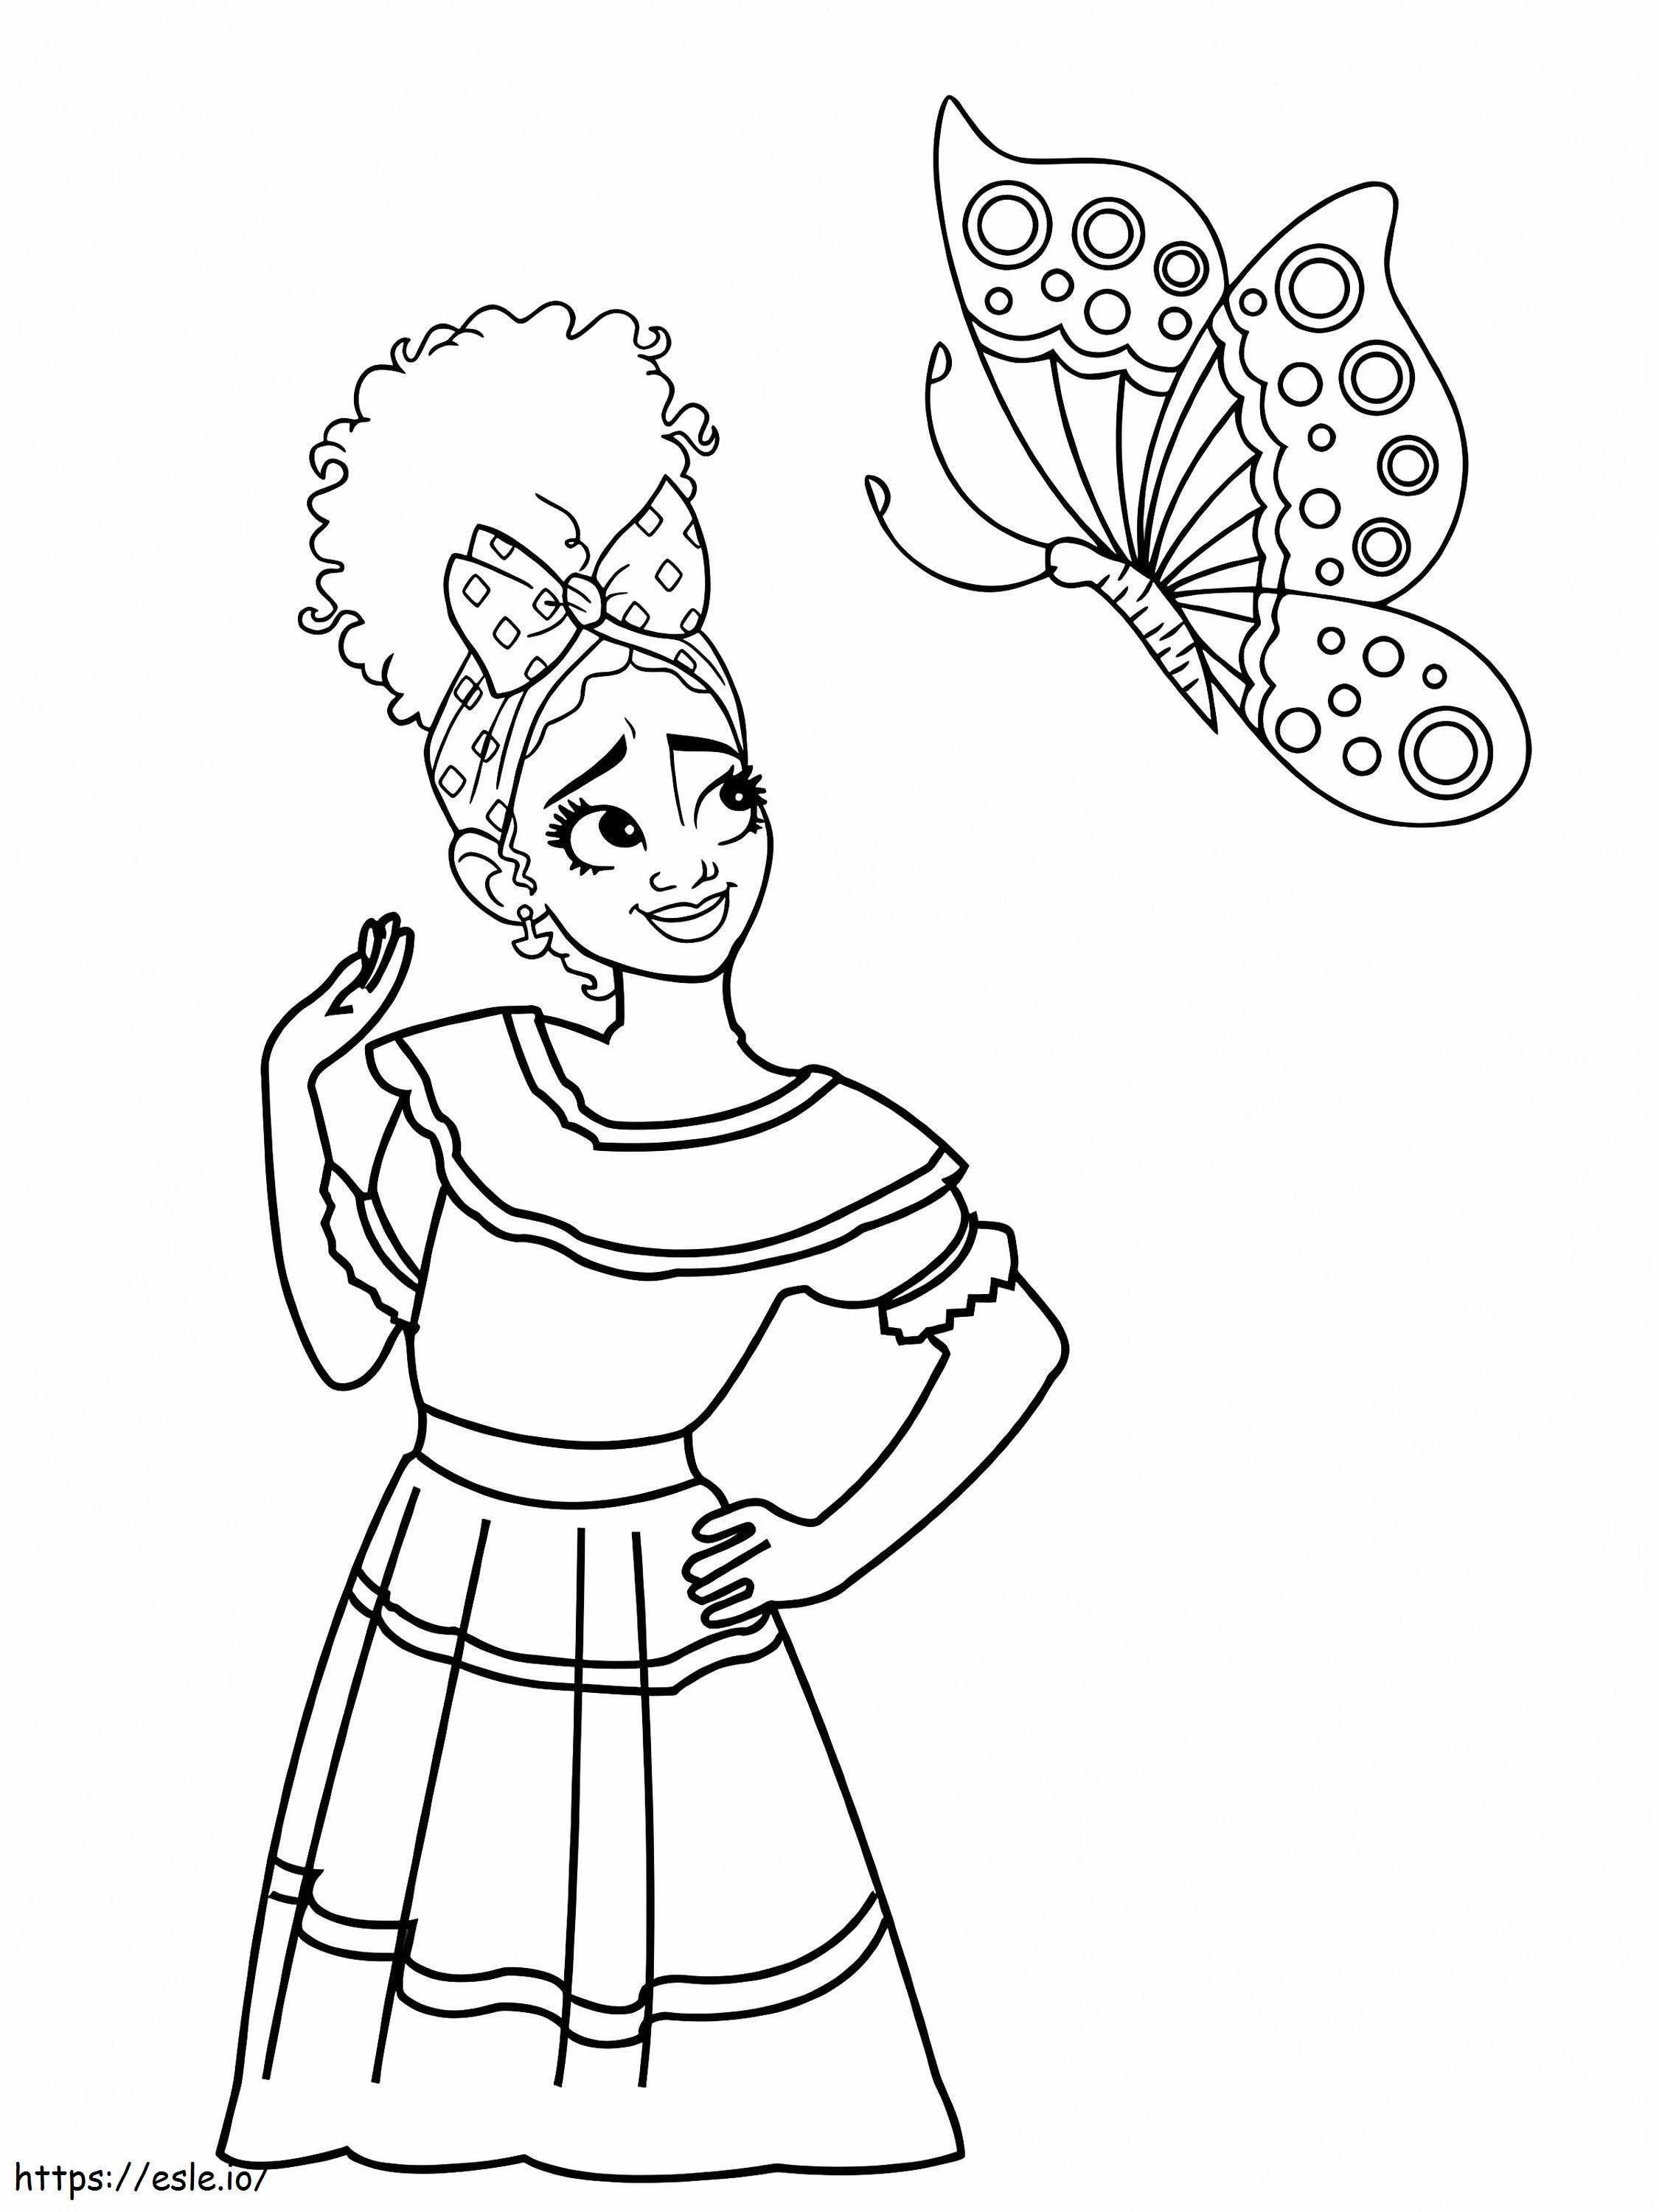 Adorable Dolores Madrigal And Butterfly coloring page